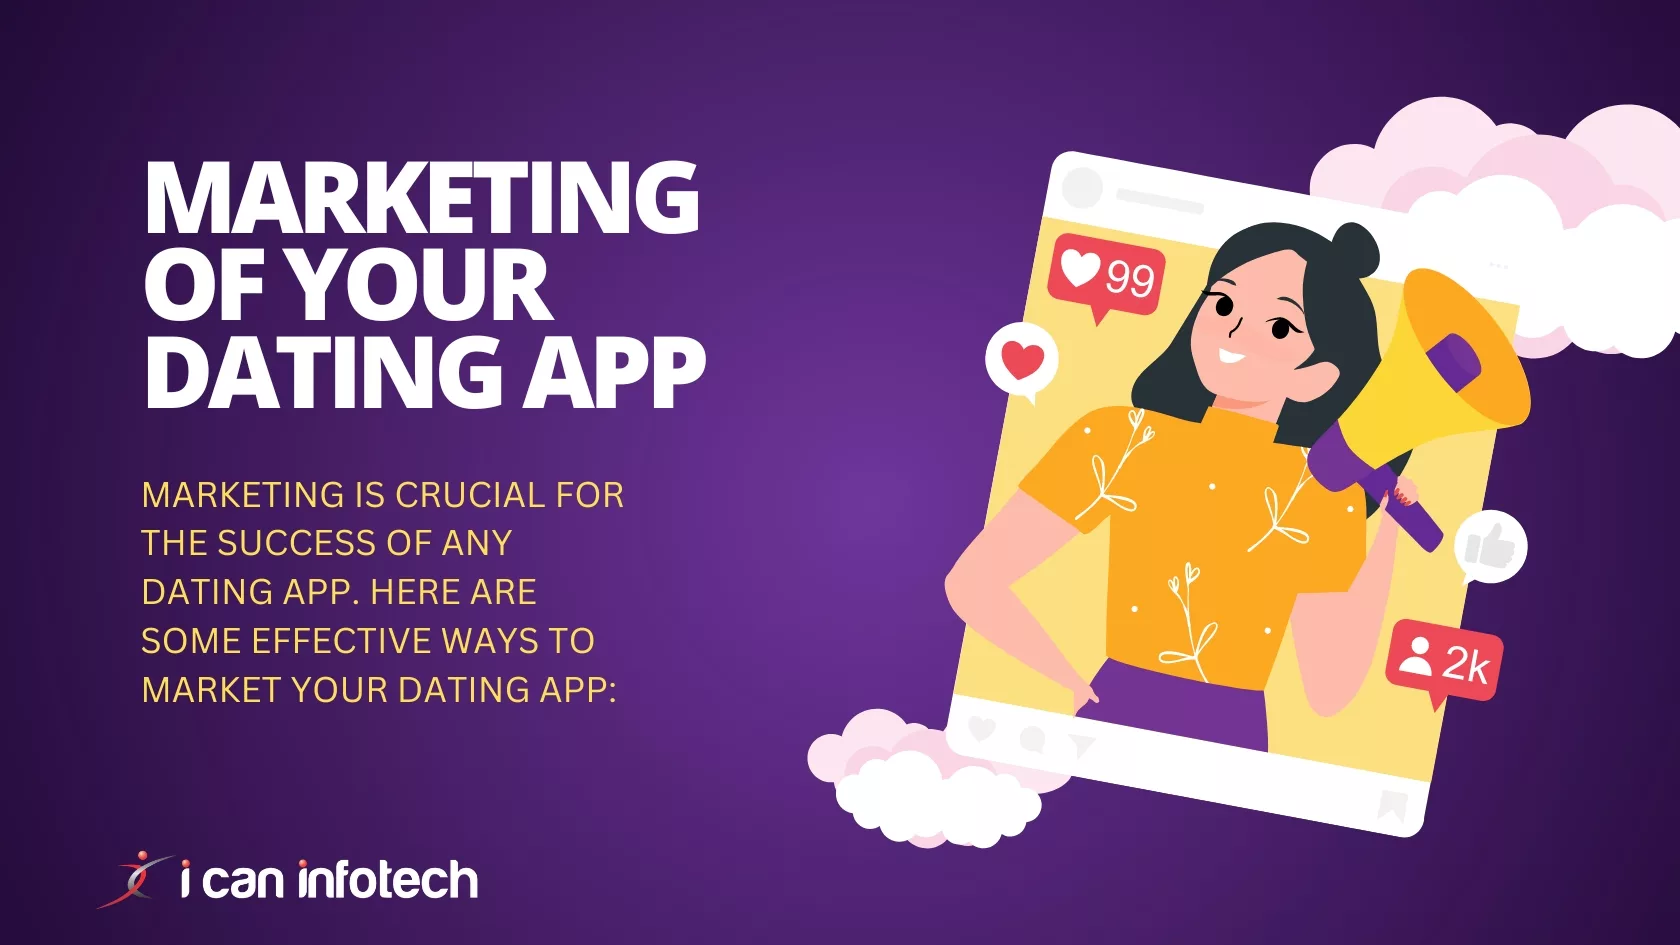 Marketing of your dating app